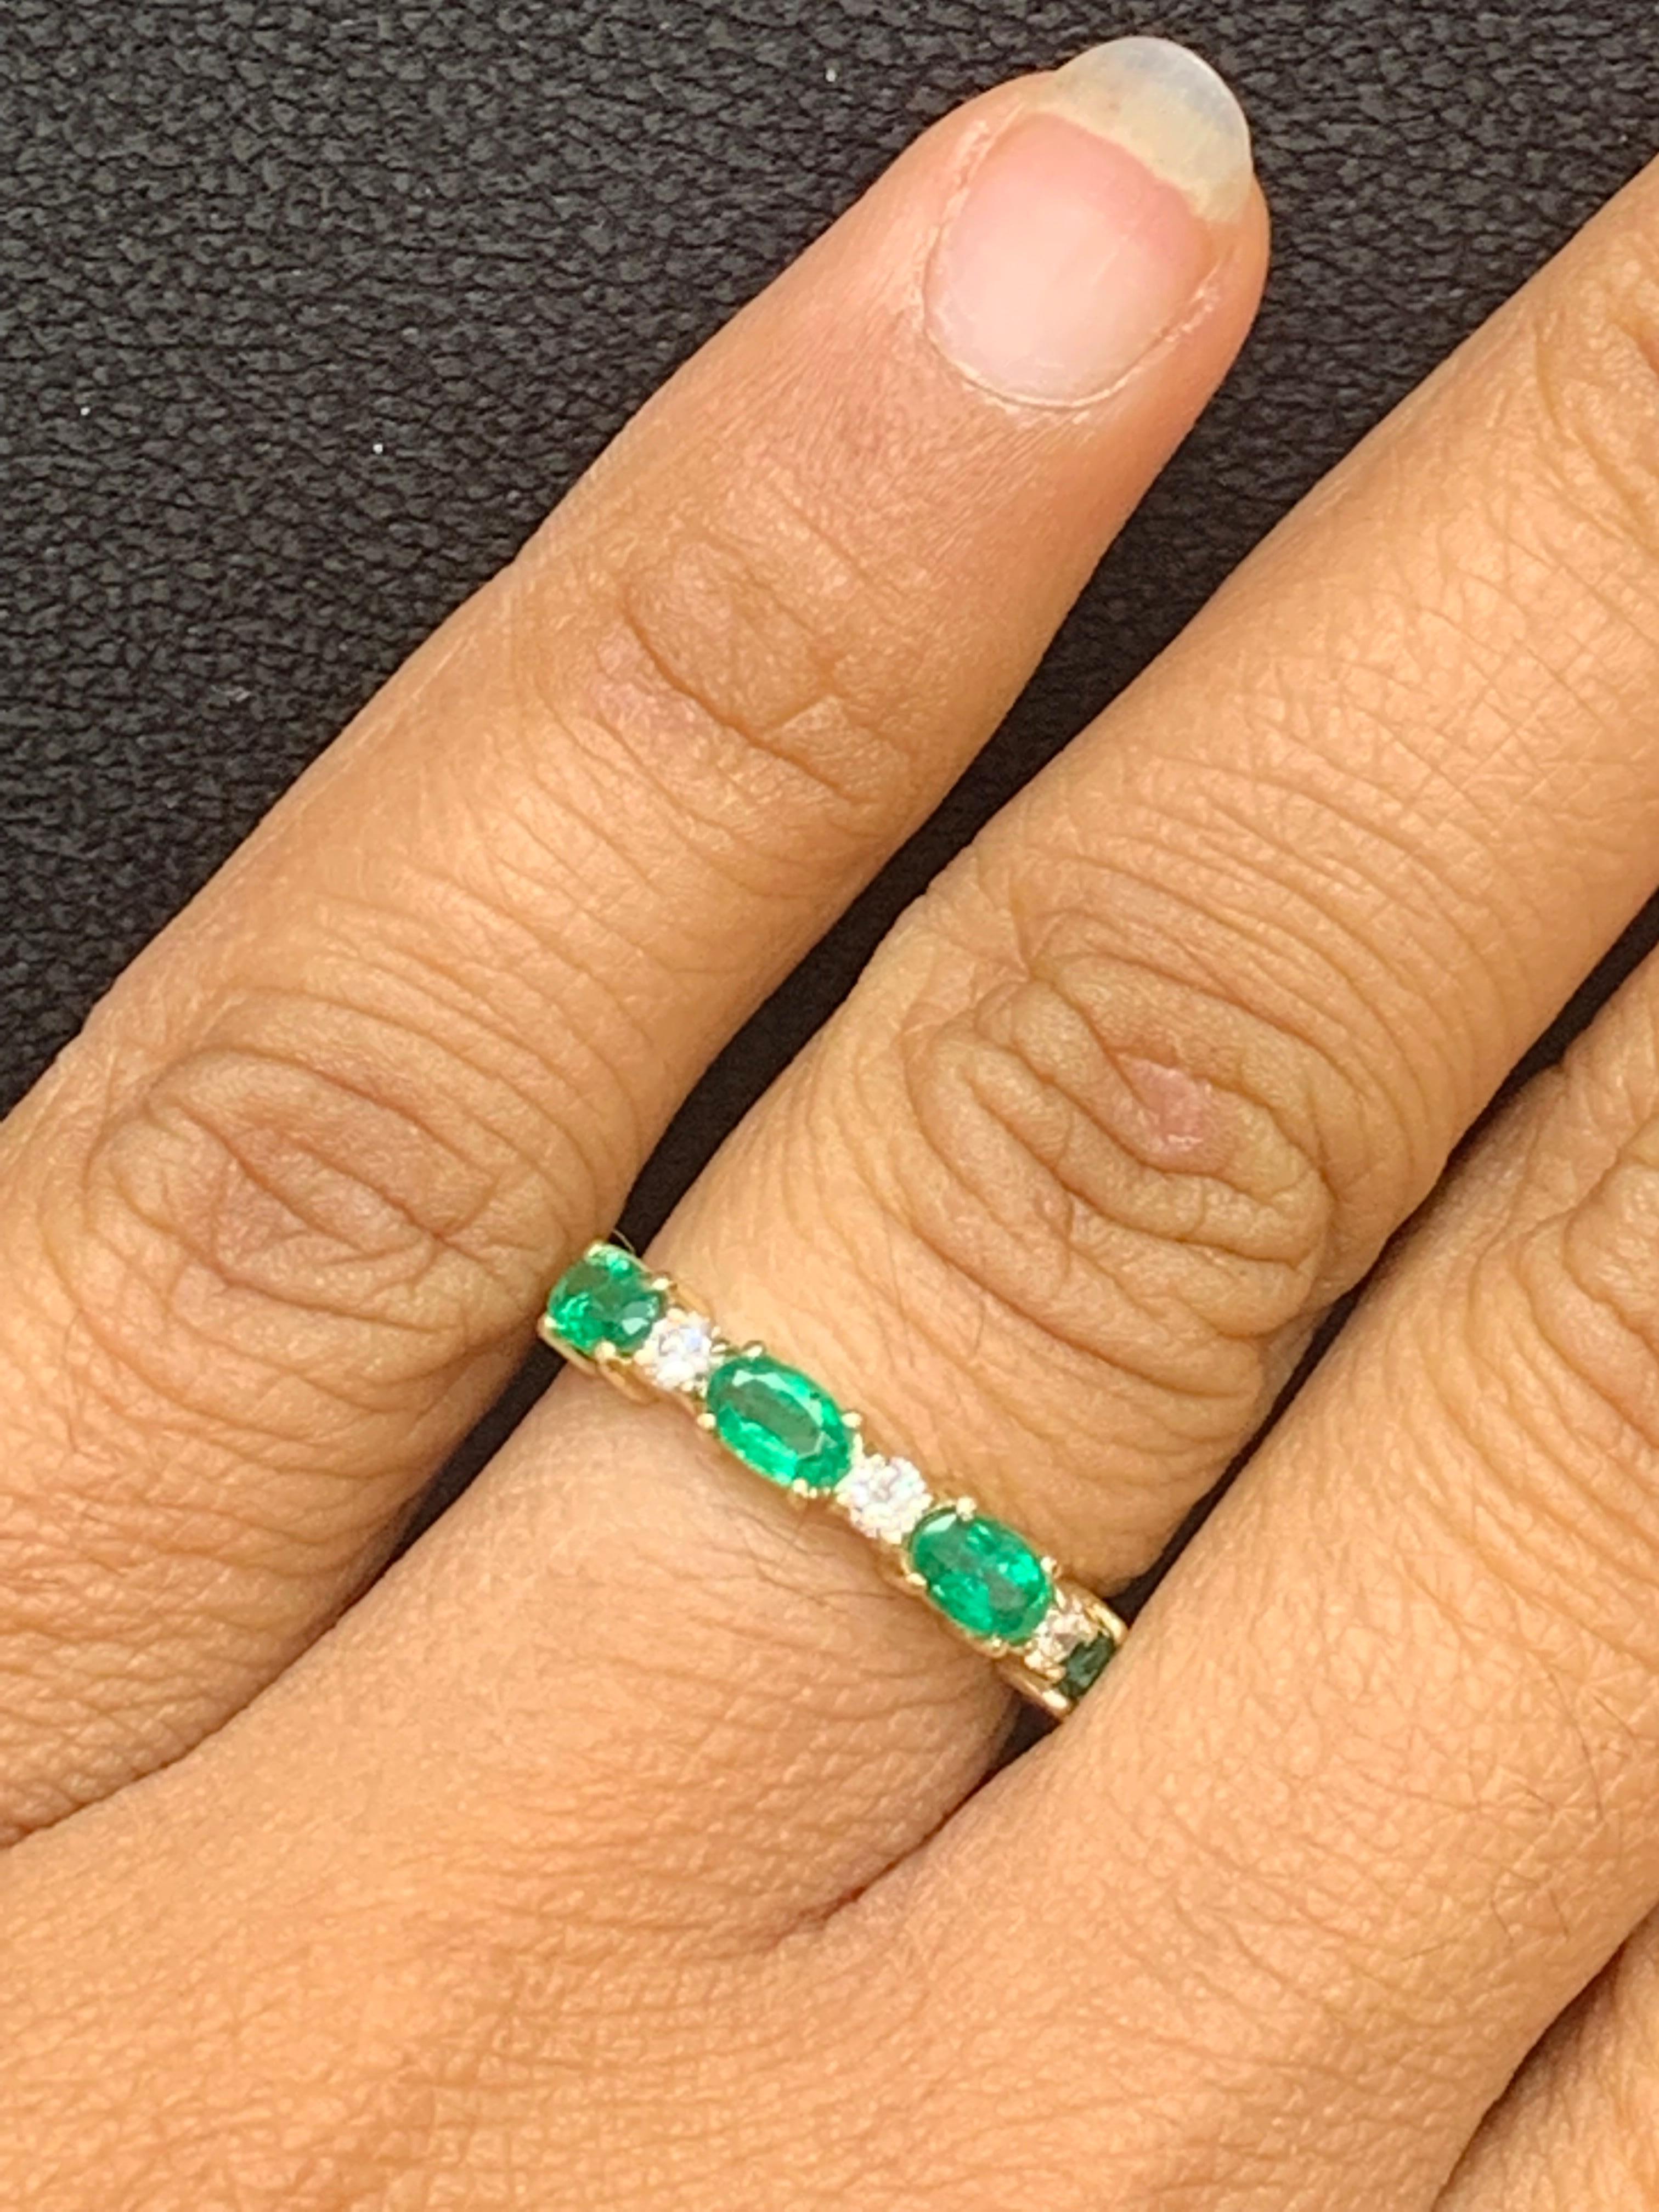 A unique and fashionable wedding band style showcasing 5 Oval Cut Emerald spaced by brilliant-cut diamonds, set in a shared-prong open gallery mounting made in 14k yellow gold. Emeralds weigh 0.94 carats total; diamonds weigh 0.20 carats total. Size